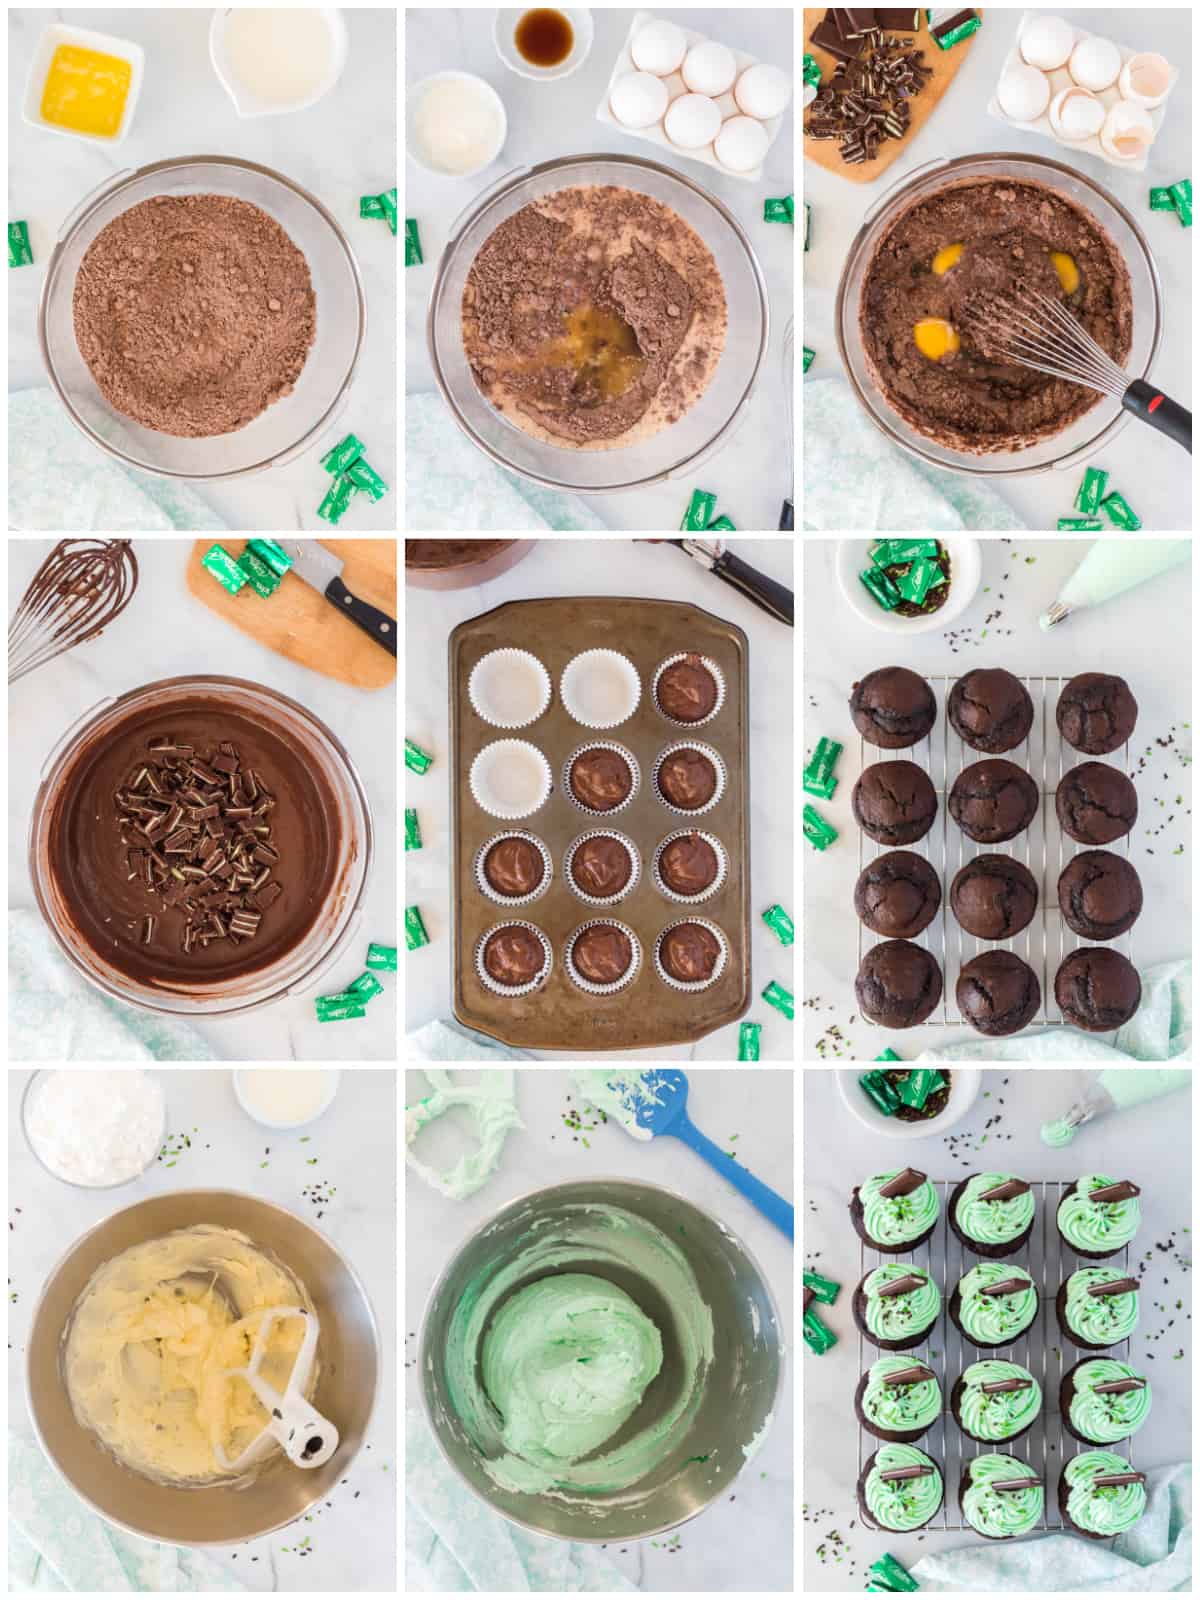 Step by step photos on how to make Mint Chocolate Cupcakes.